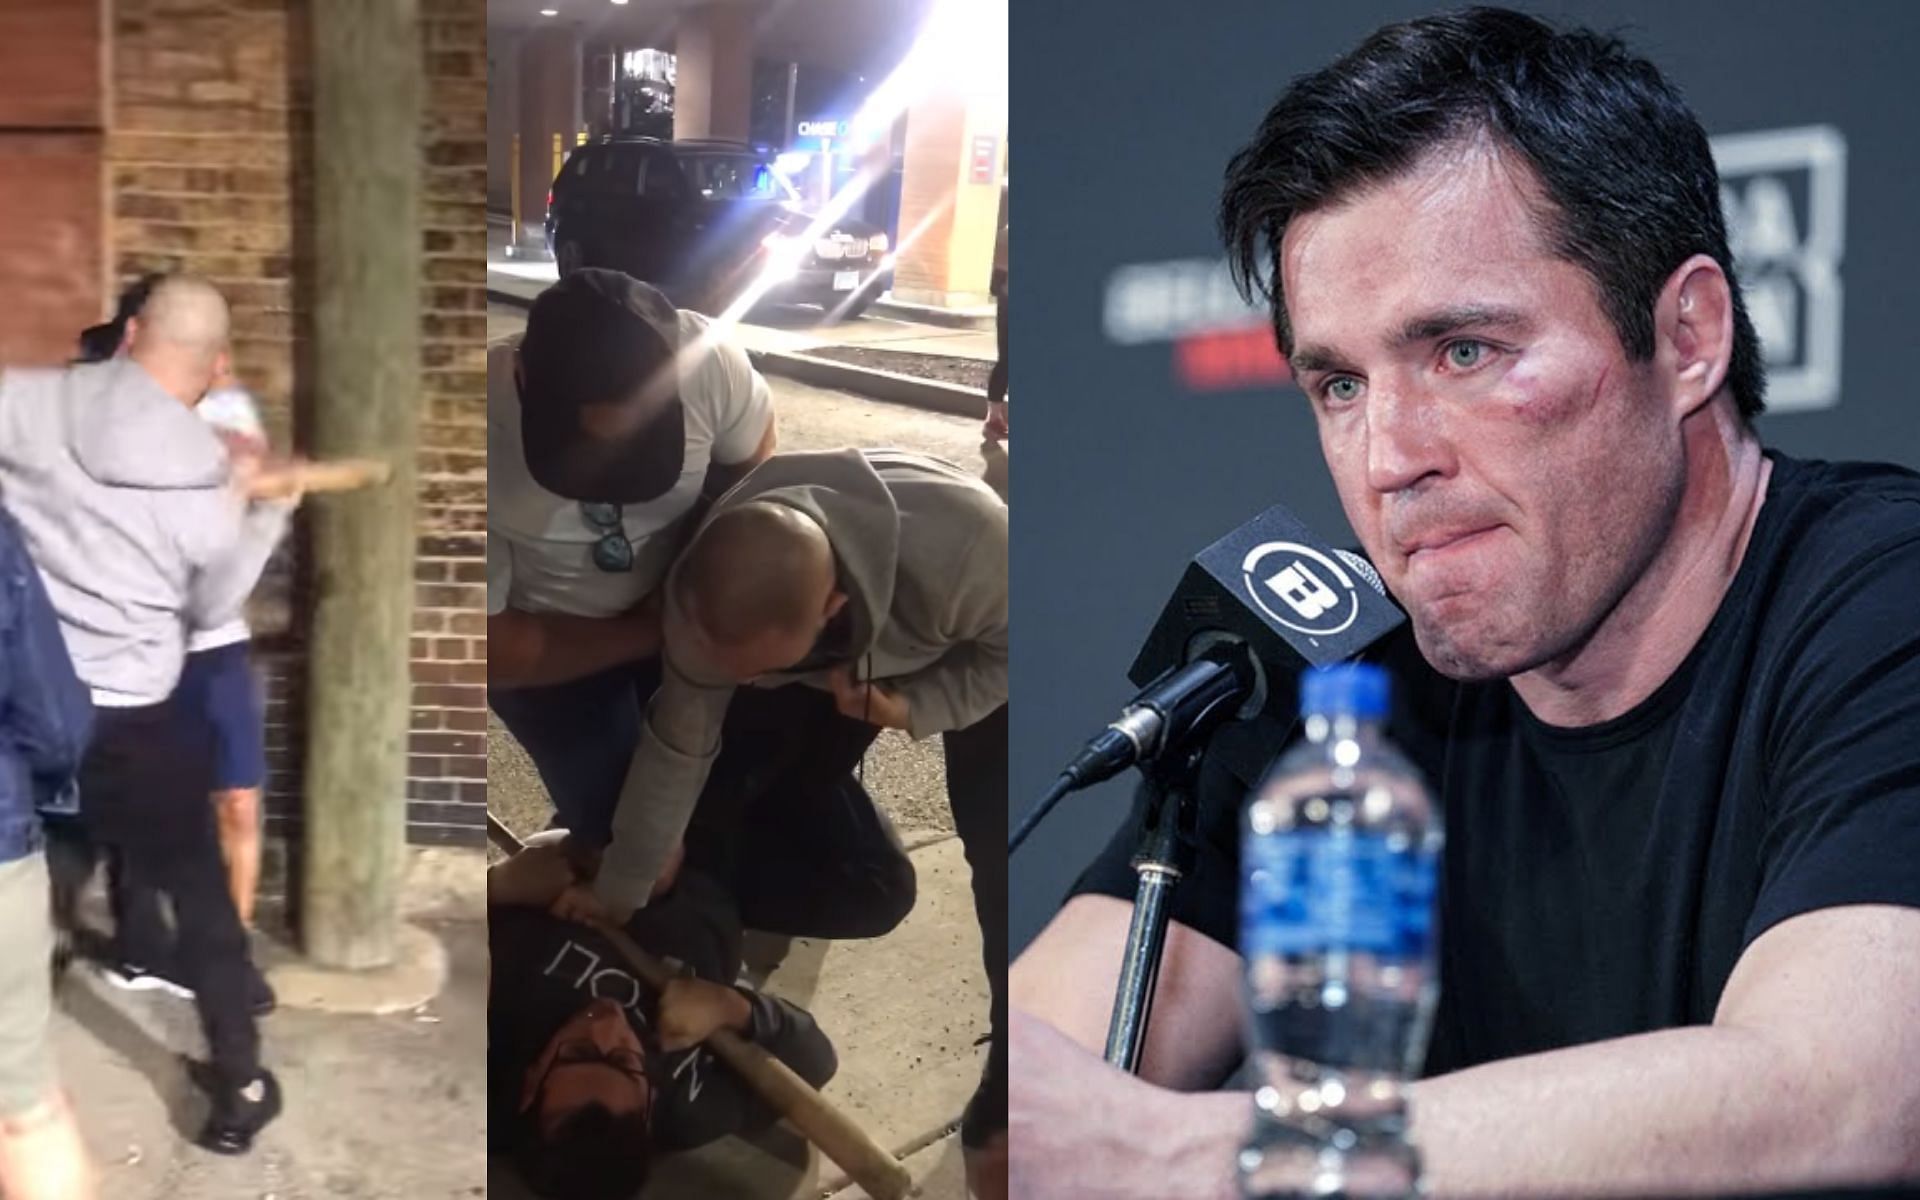 Jared Gordon&#039;s altercation with the man (left and center) and Chael Sonnen (right) [Images courtesy: left and center stills from Instagram @jaredflashgordon and right image from YouTube MMA Junkie]